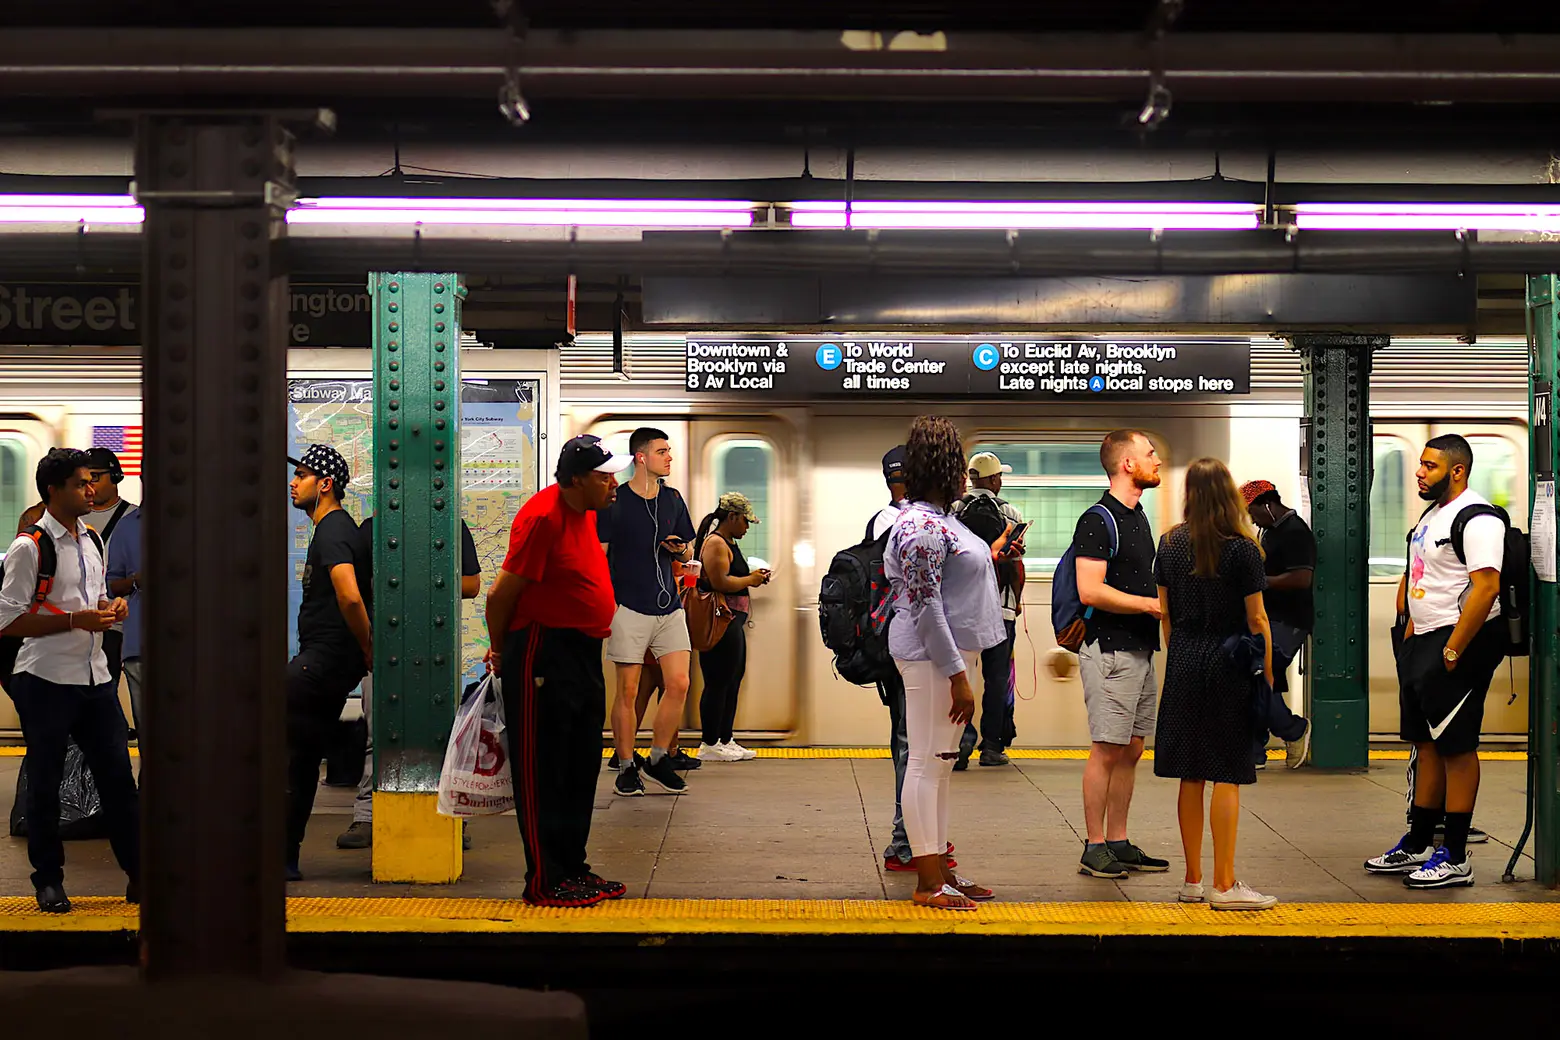 Expect delays on the 4, 5, D, N, and Q lines this weekend